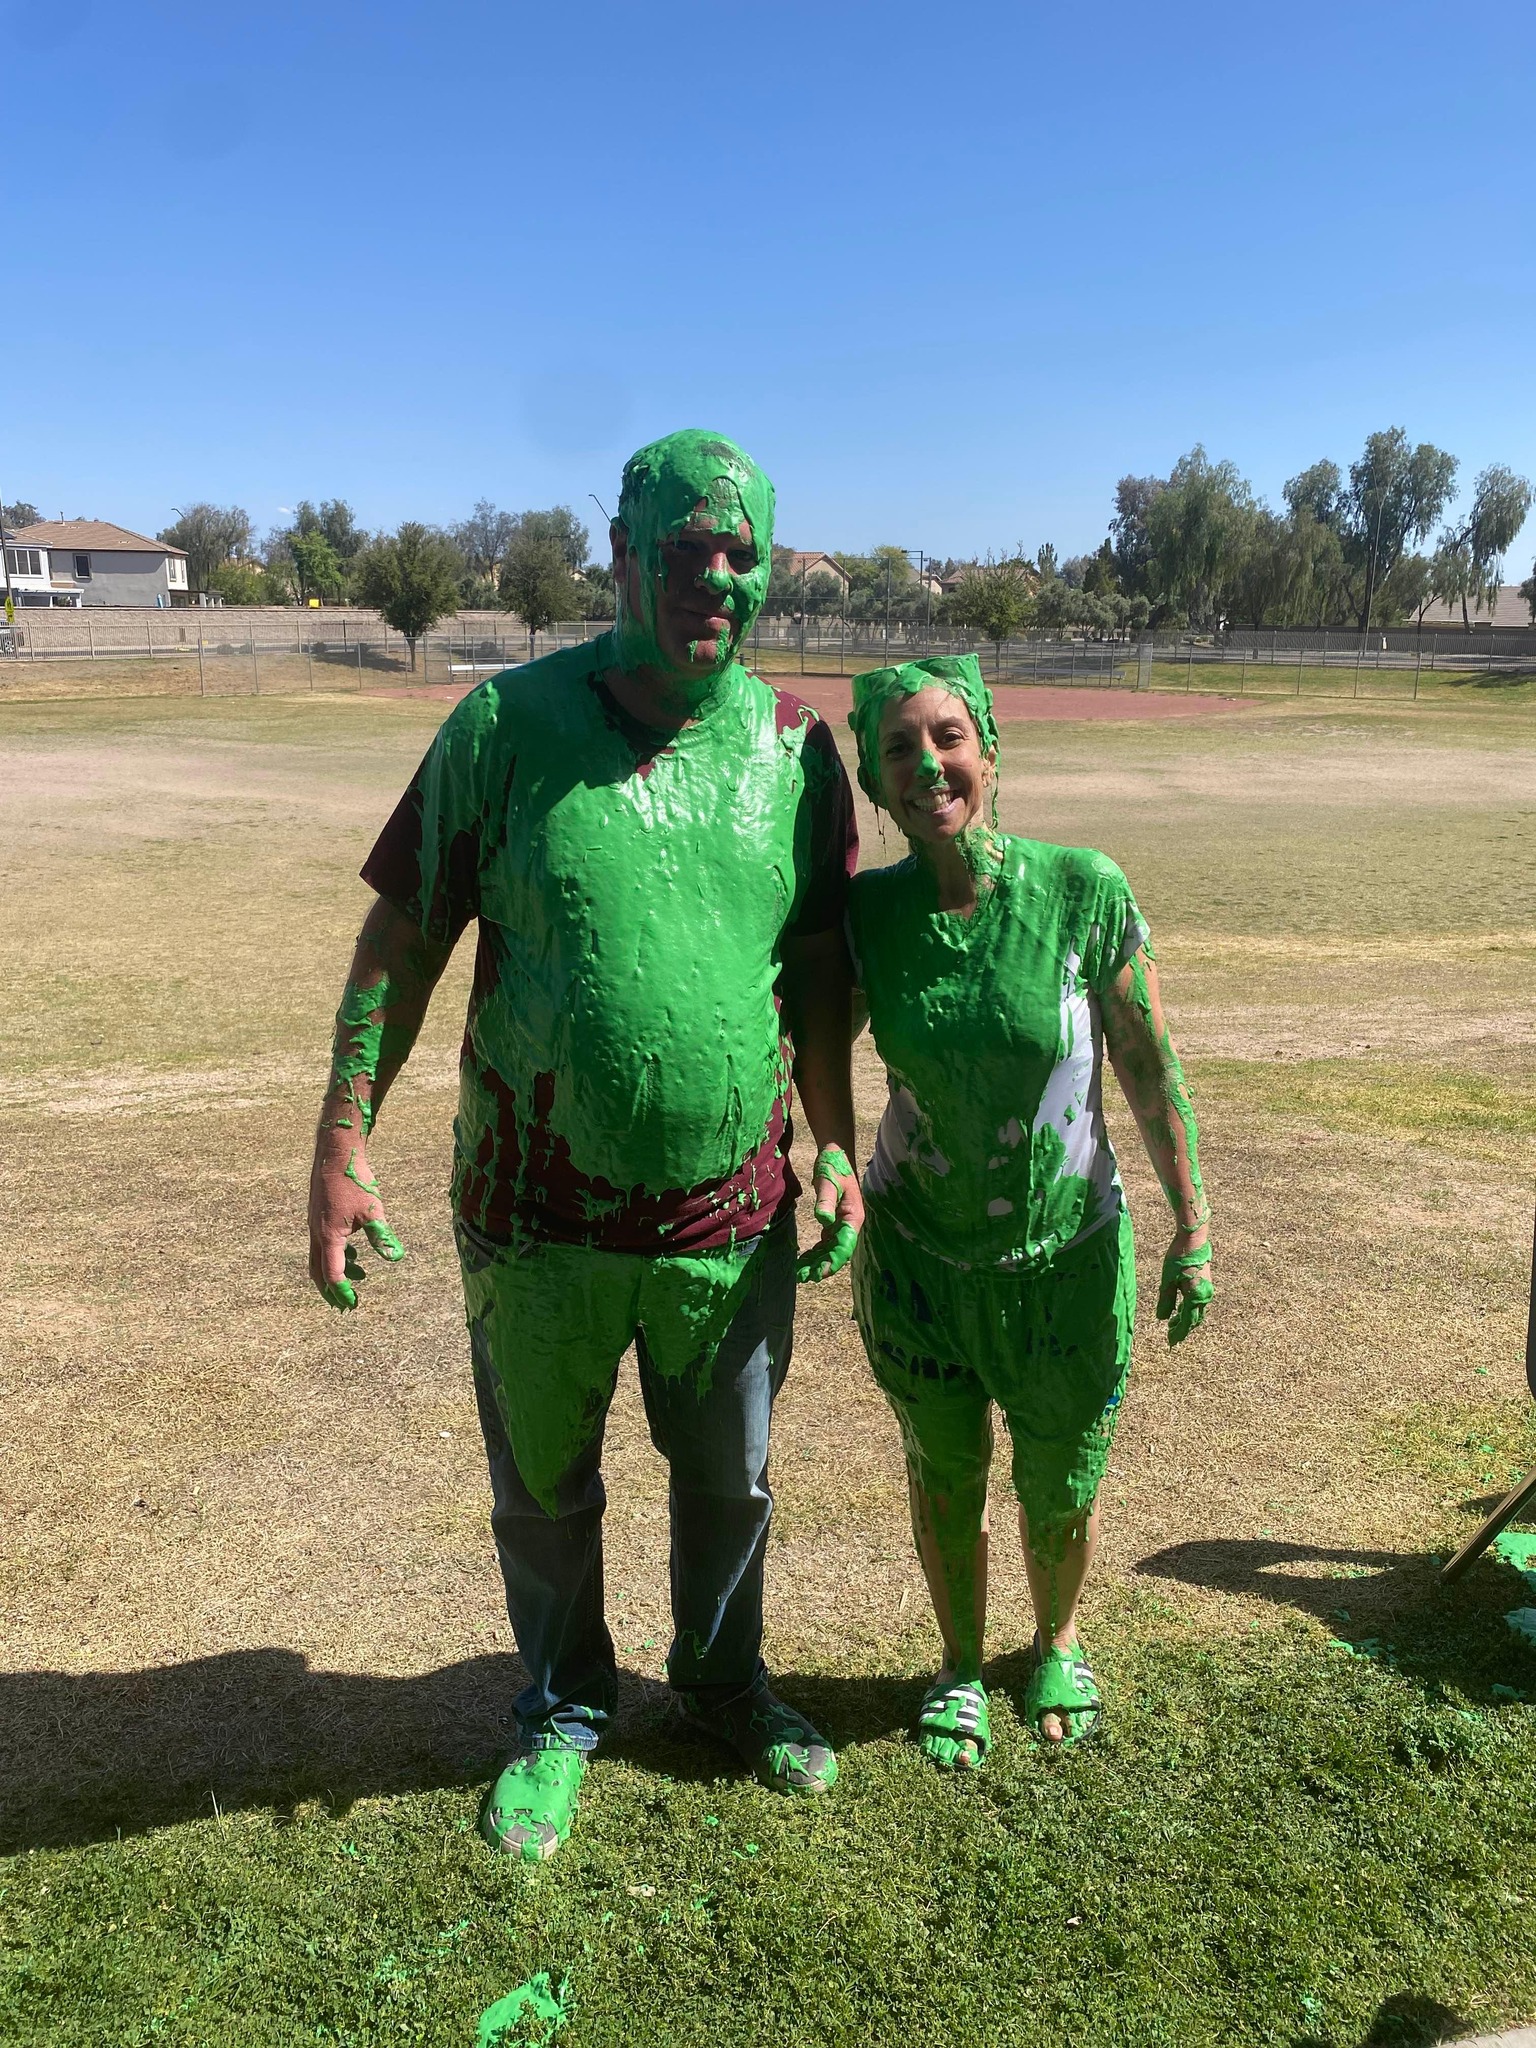 Principals standing together with slime on them